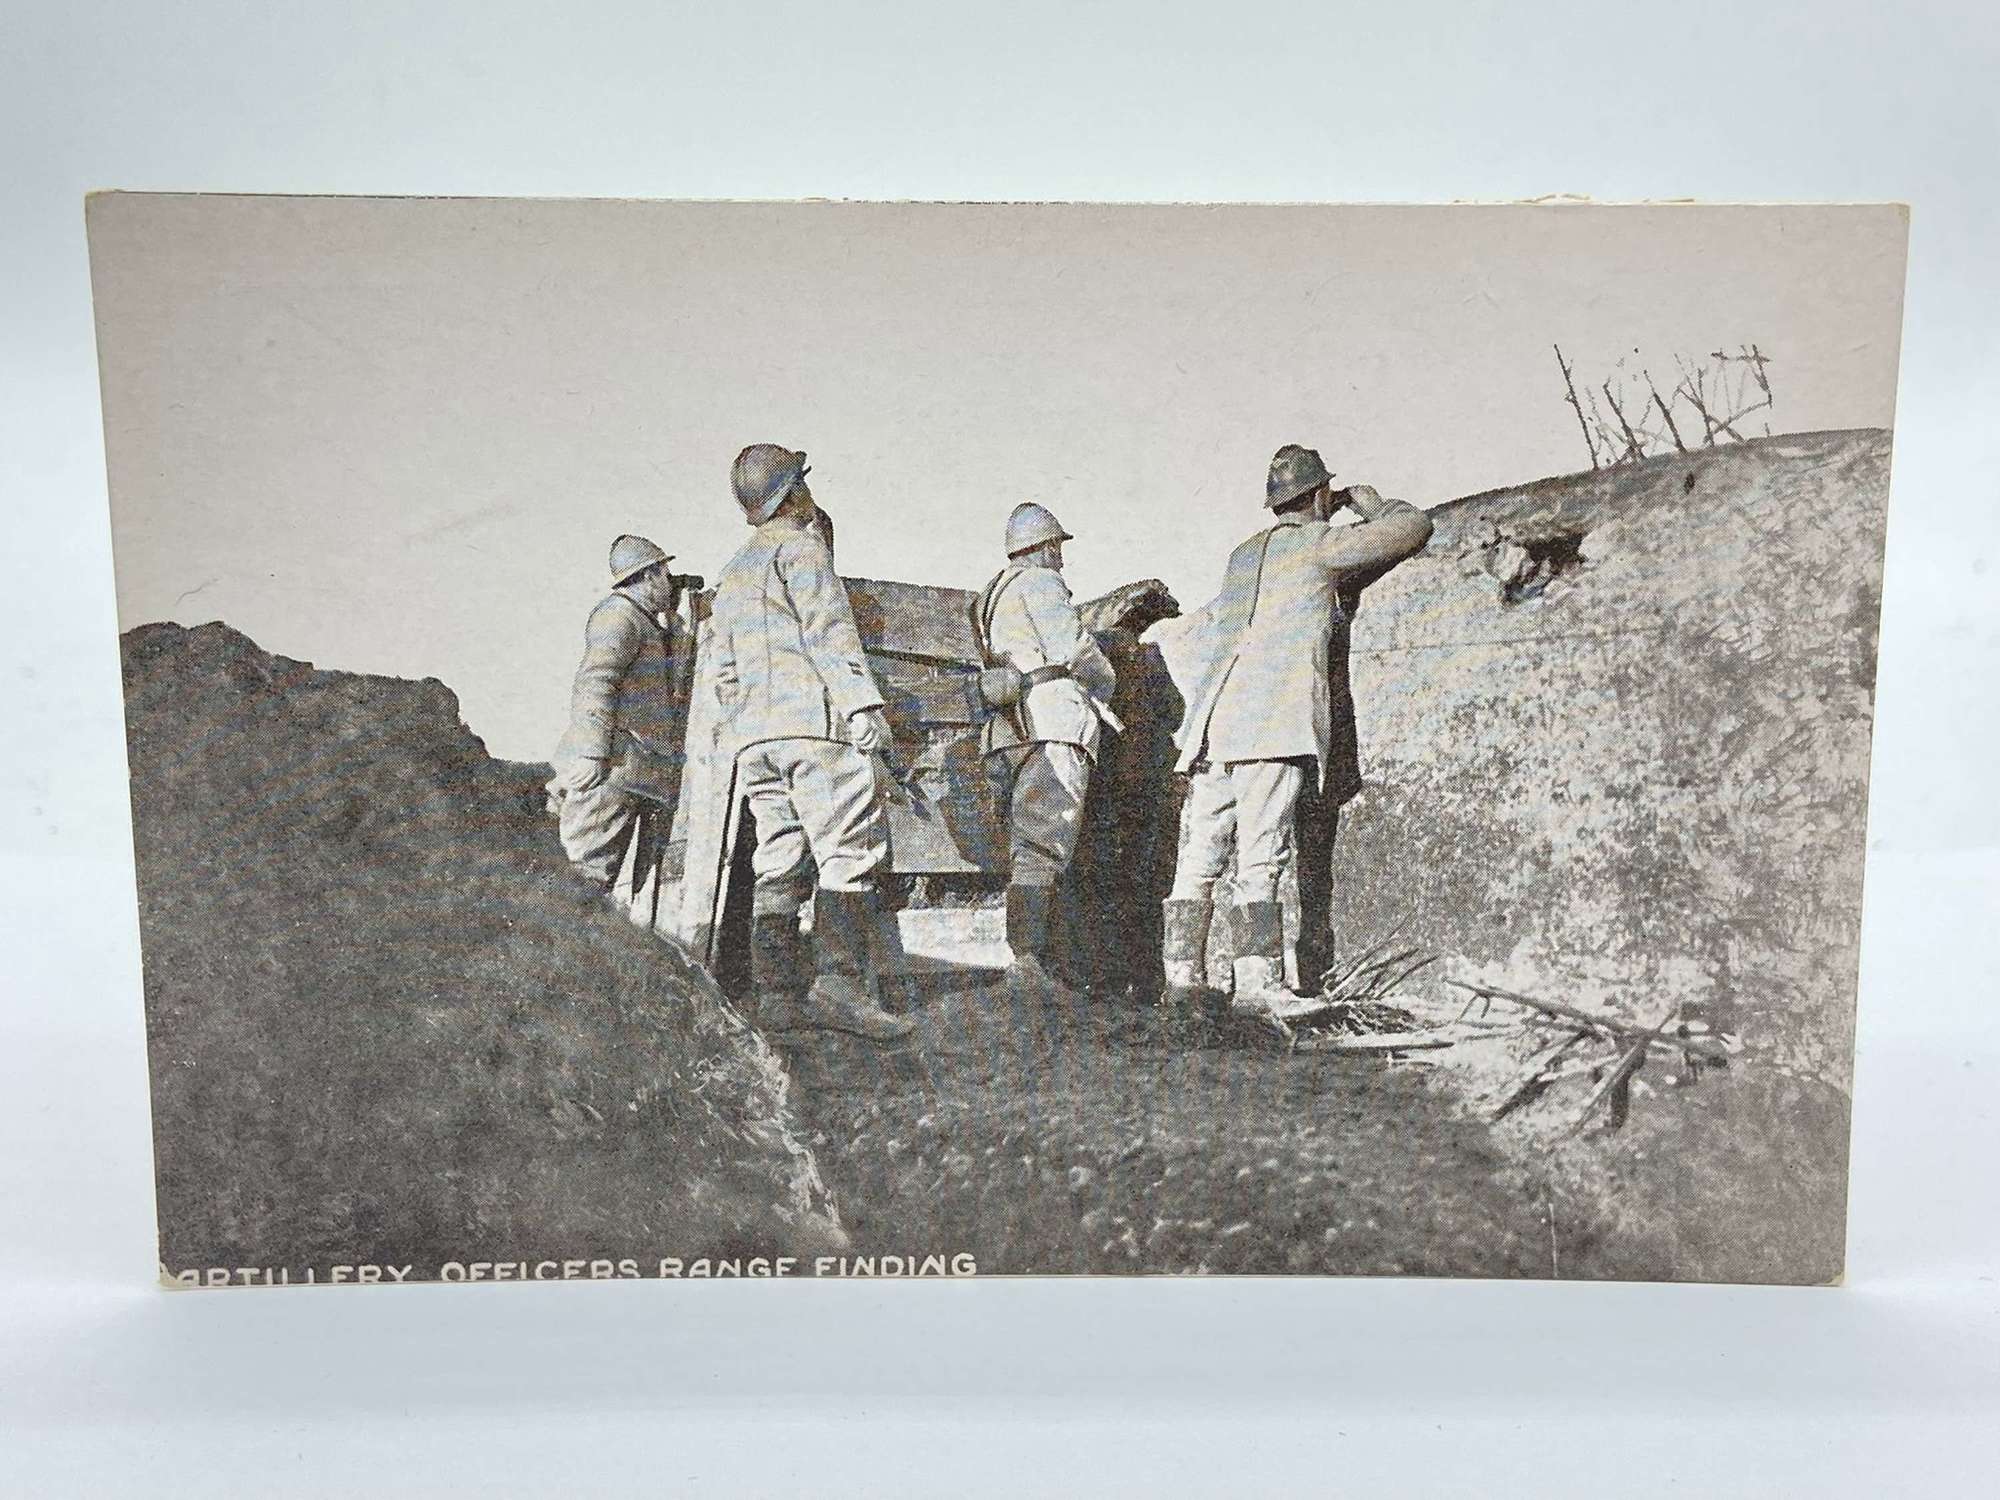 WW1 French Army Artillery Officers Range Finding Photographic Postcard